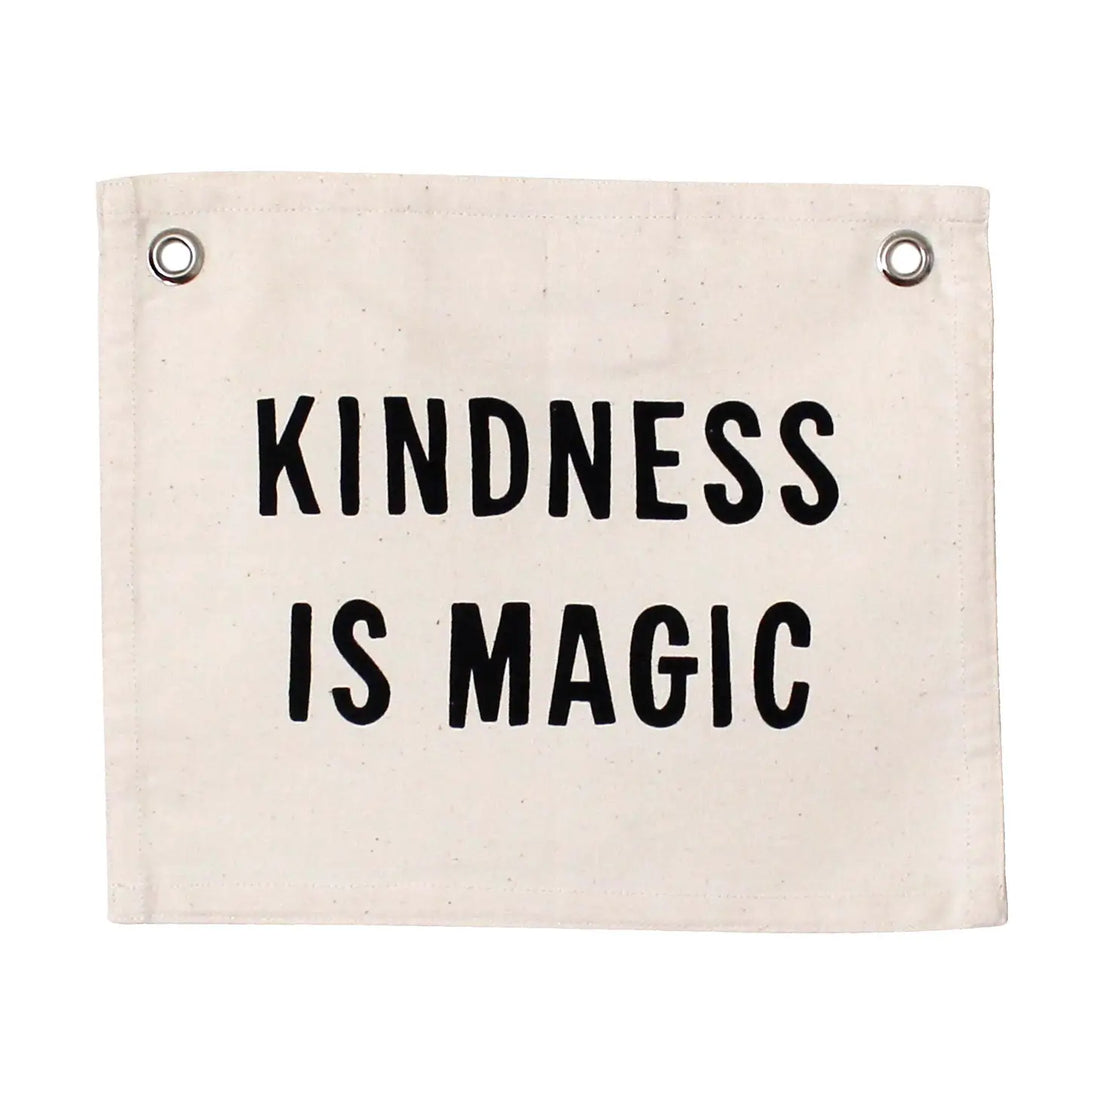 Kindness is Magic petite banner